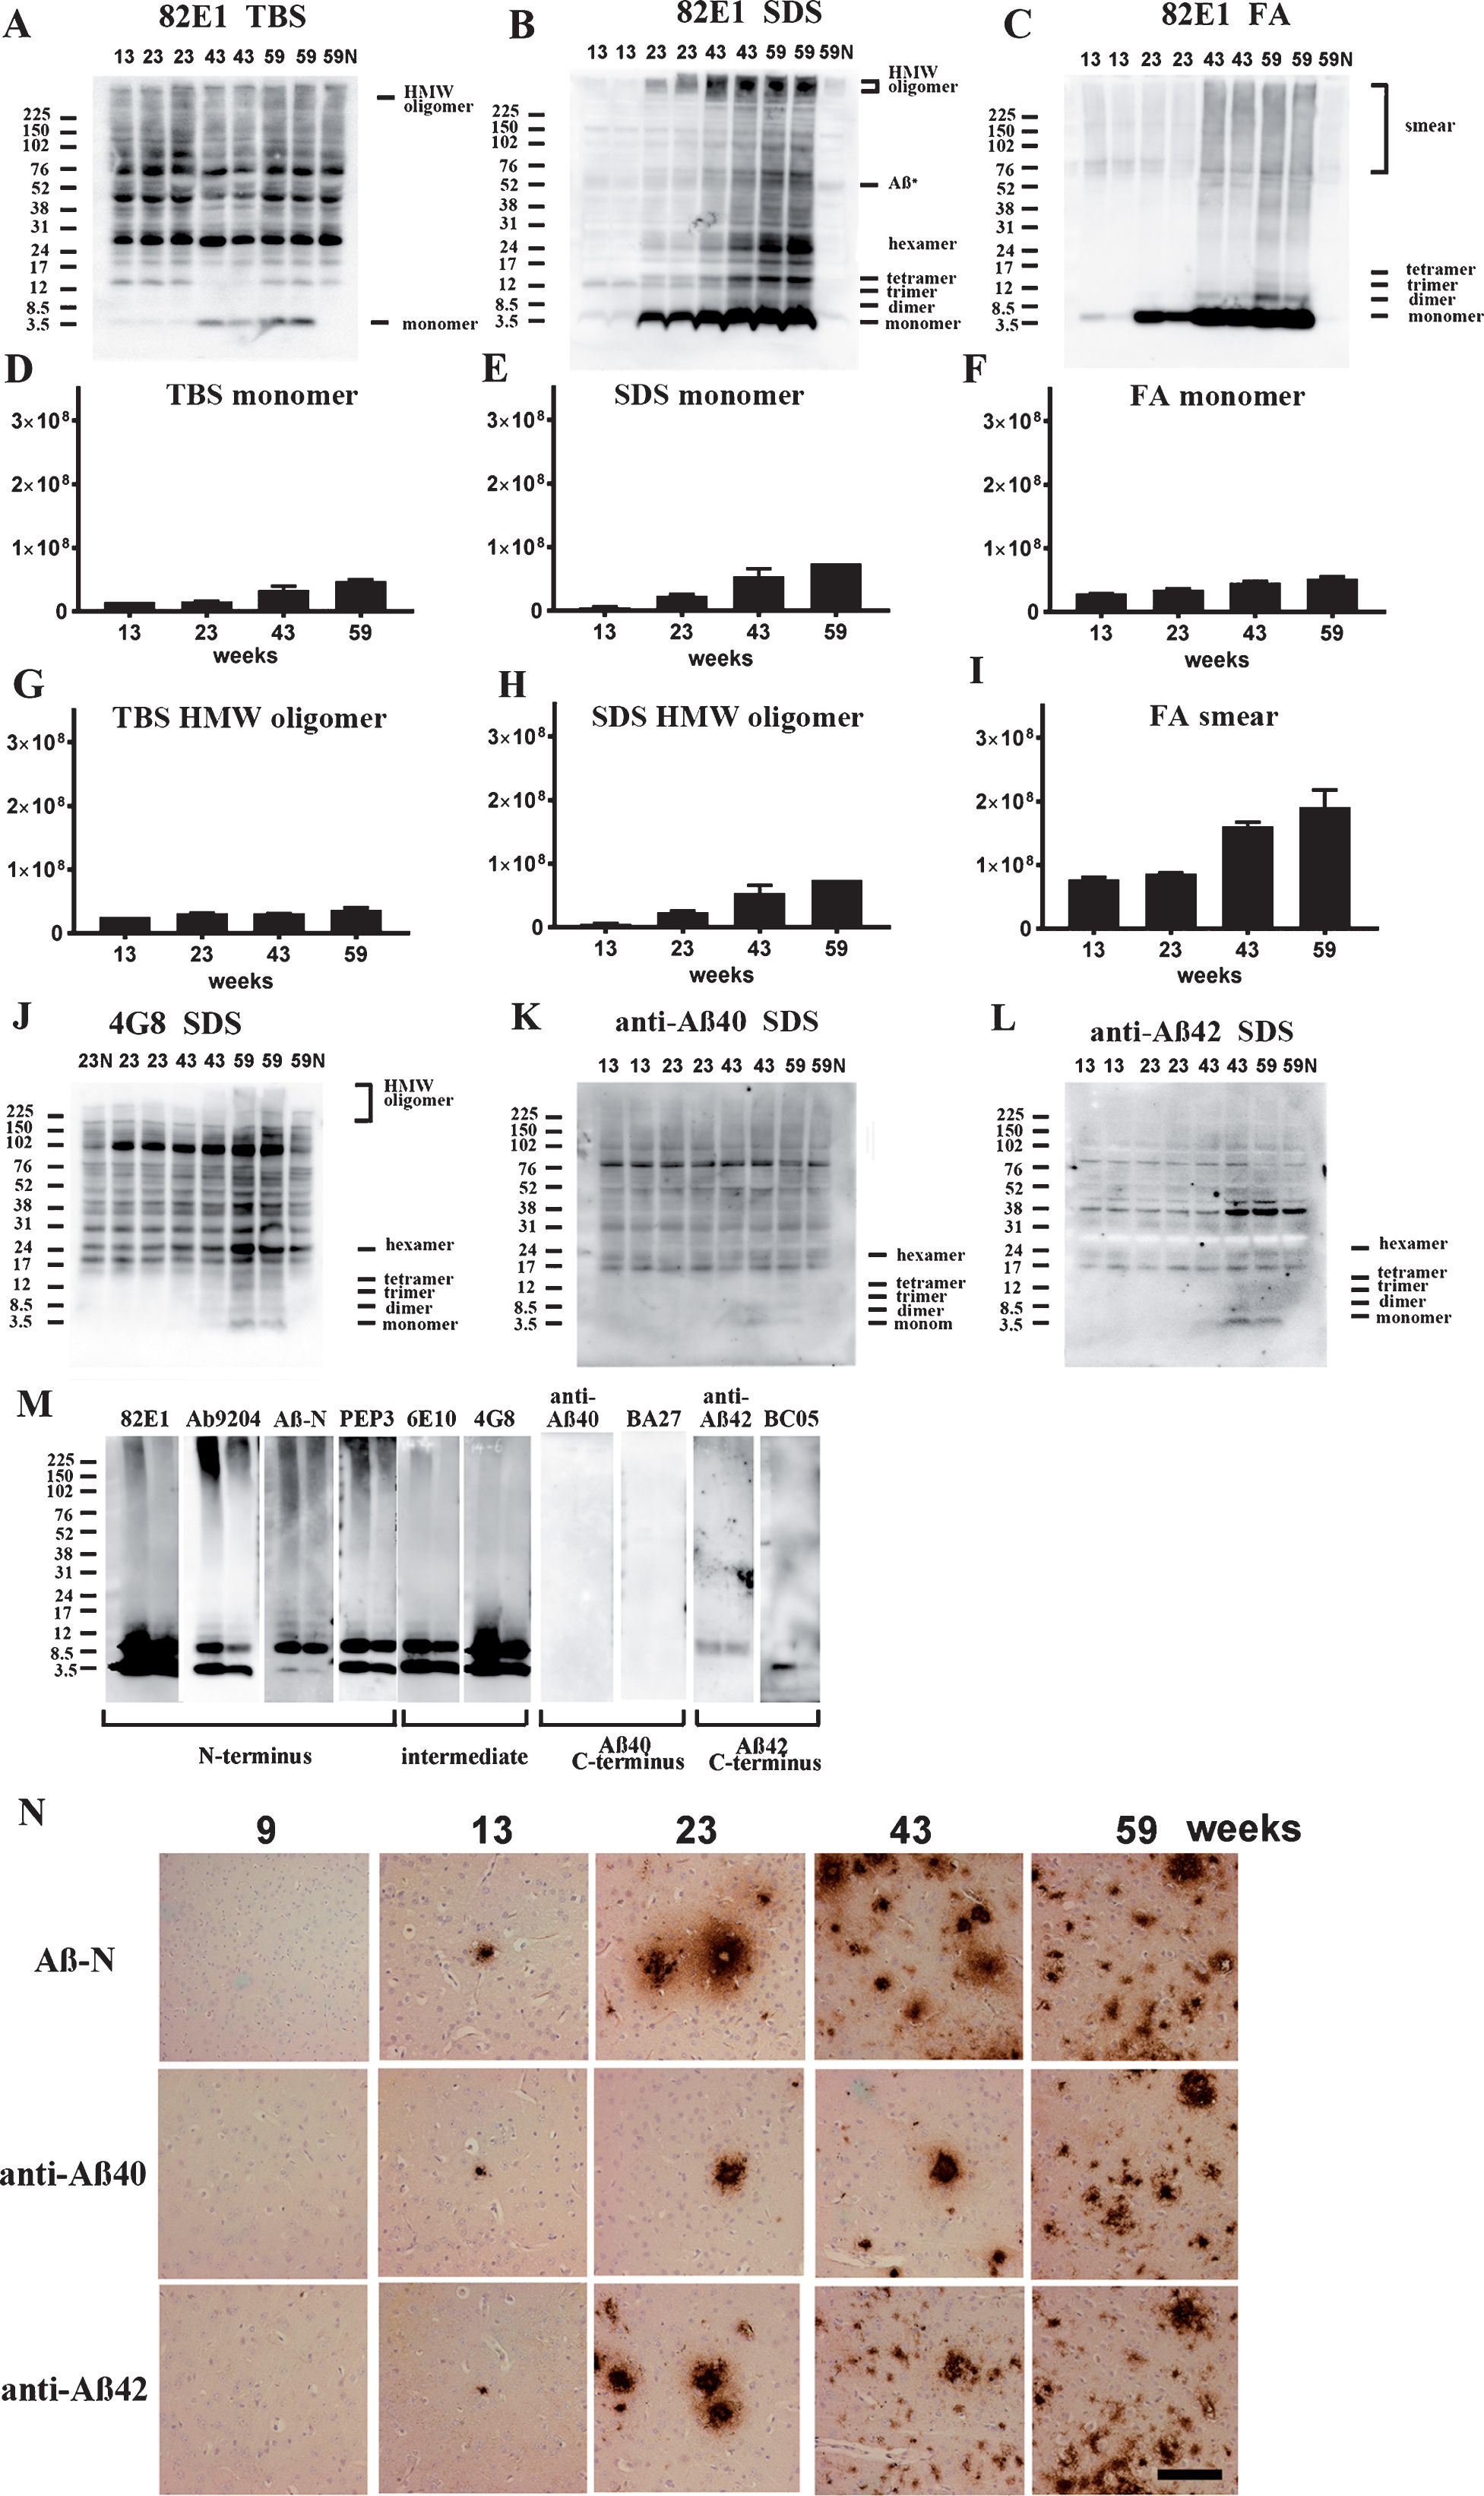 Age-dependent increase of Aβ monomer and Aβ oligomers in brains of TgCRND8 without an oral immunization trial (A–L), antibody epitope mapping of aggregated synthetic Aβ1–42 (M), and immunostaining of TgCRND8 brains without an oral immunization trial (N). D–I are quantification of Aβ monomer in each fraction (D–F), HMW oligomers in TBS and SDS fraction (G, H), and Aβ smear in the FA fraction (I). 59N indicates nontransgenic littermates at 59 weeks. A) In TBS fractions, Aβ monomers were detected by 82E1 from 13 weeks and the amount increased with age (D). Other molecular weight oligomers except HMW oligomers (G) were difficult to detect because of the existence of mouse IgGs. B) In SDS fractions, Aβ monomers and AβOs, including di-, tri-, tetra-, and Aβ*56, and HMW AβOs, were visualized from 13 weeks. Respective species increased with age (E, H). C) In FA fractions, Aβ monomers from 13 weeks, Aβ dimers from 43 weeks, and diffuse smear patterns from 43 weeks were found (F, I). J–L) 4G8, anti-Aβ40, and anti-Aβ42 weakly detected LMW AβOs, but could not detect HMW AβOs. M) HMW AβOs were detected by antibodies against the N-terminus (82E1, Ab9204, Aβ-N, and PEP3), and were weakly detected by antibodies against the mid portion of Aβ (6E10 and 4G8), but were not detected by anti-Aβ42 and BC-05. Anti-C-terminus to Aβ40 (anti-Aβ40 and BA-27) did not detect Aβ1–42. N) Immunostaining of TgCRND8 brains using Aβ-N (1:1000), anti-Aβ40 (1:1000), and anti-Aβ42 (1:400) showed age-dependent Aβ deposition. Aβ burden labeled by anti-Aβ40 and anti-Aβ42 were weaker than those by Aβ-N. Bar represents 100 μm. One mouse at 13 weeks, 2 mice at 23 weeks, 43 weeks, and 59 weeks were used for analysis.